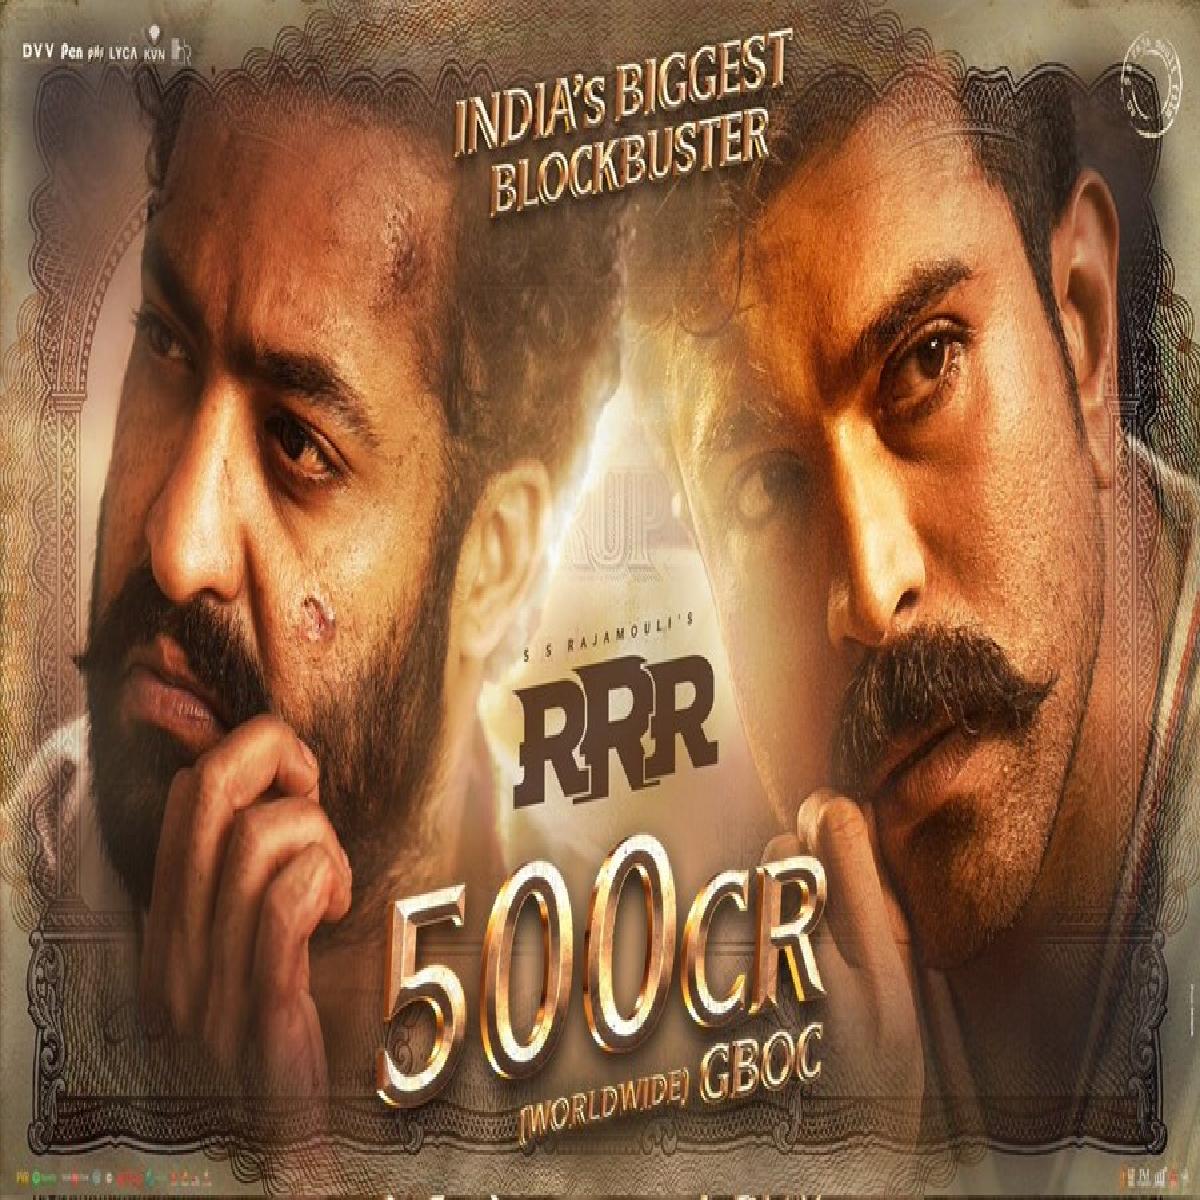 RRR Mint 500 Cr At The Box Office